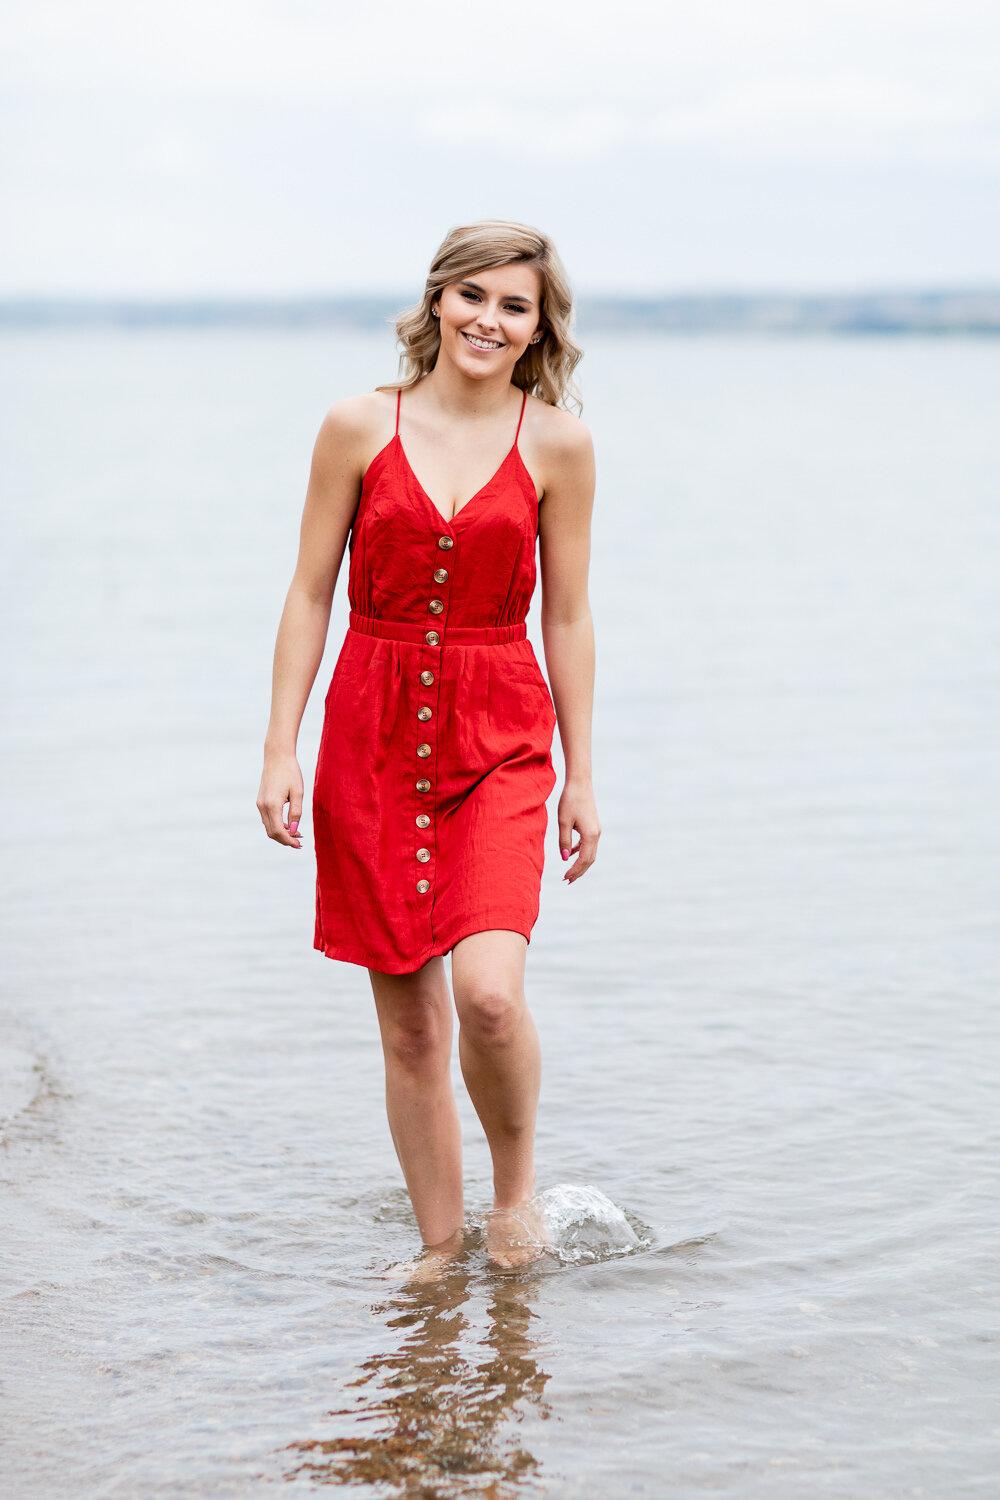 Red dress in water